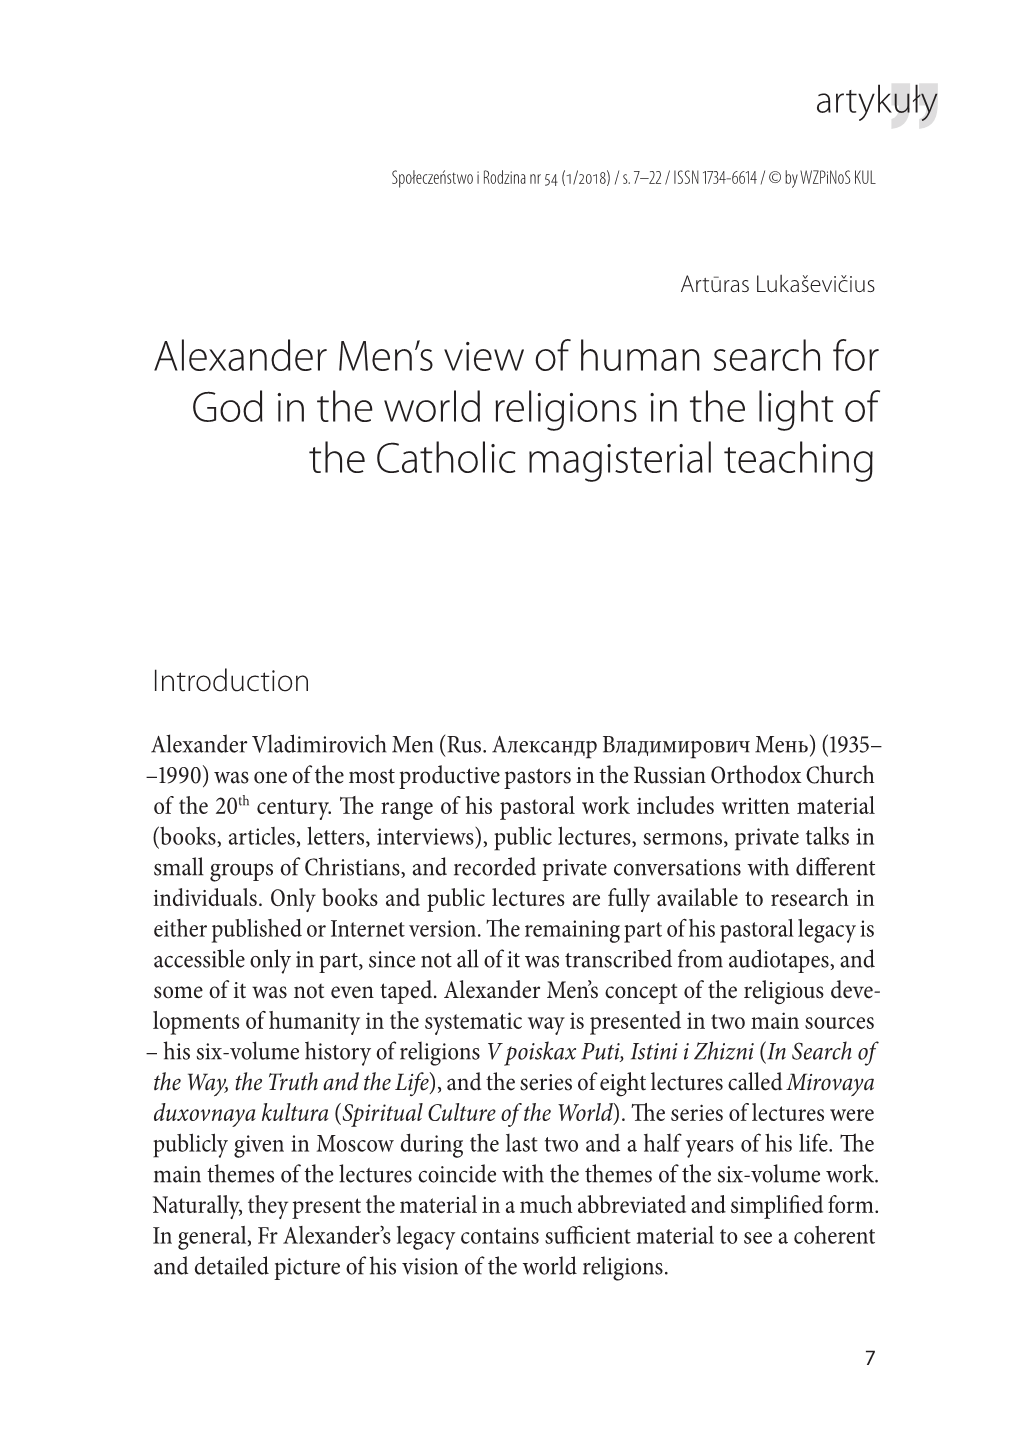 Alexander Men's View of Human Search for God in the World